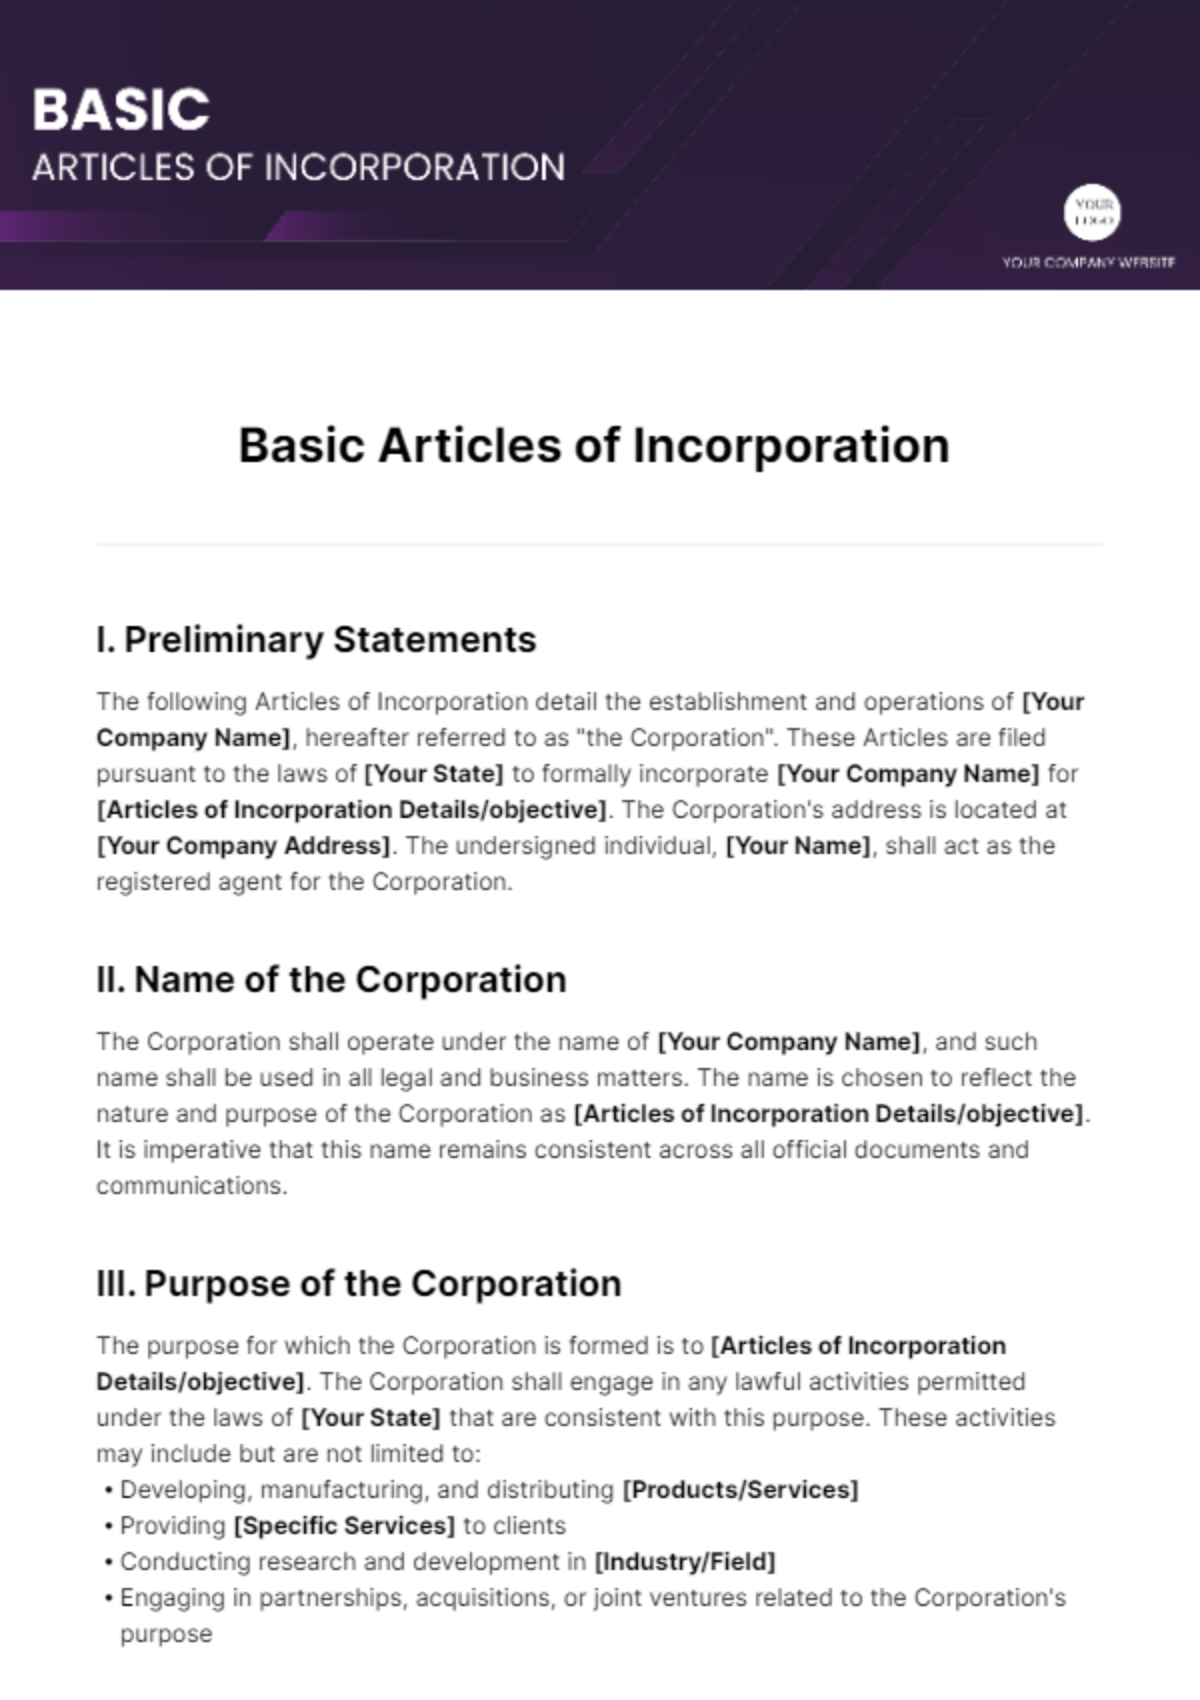 Basic Articles of Incorporation Template